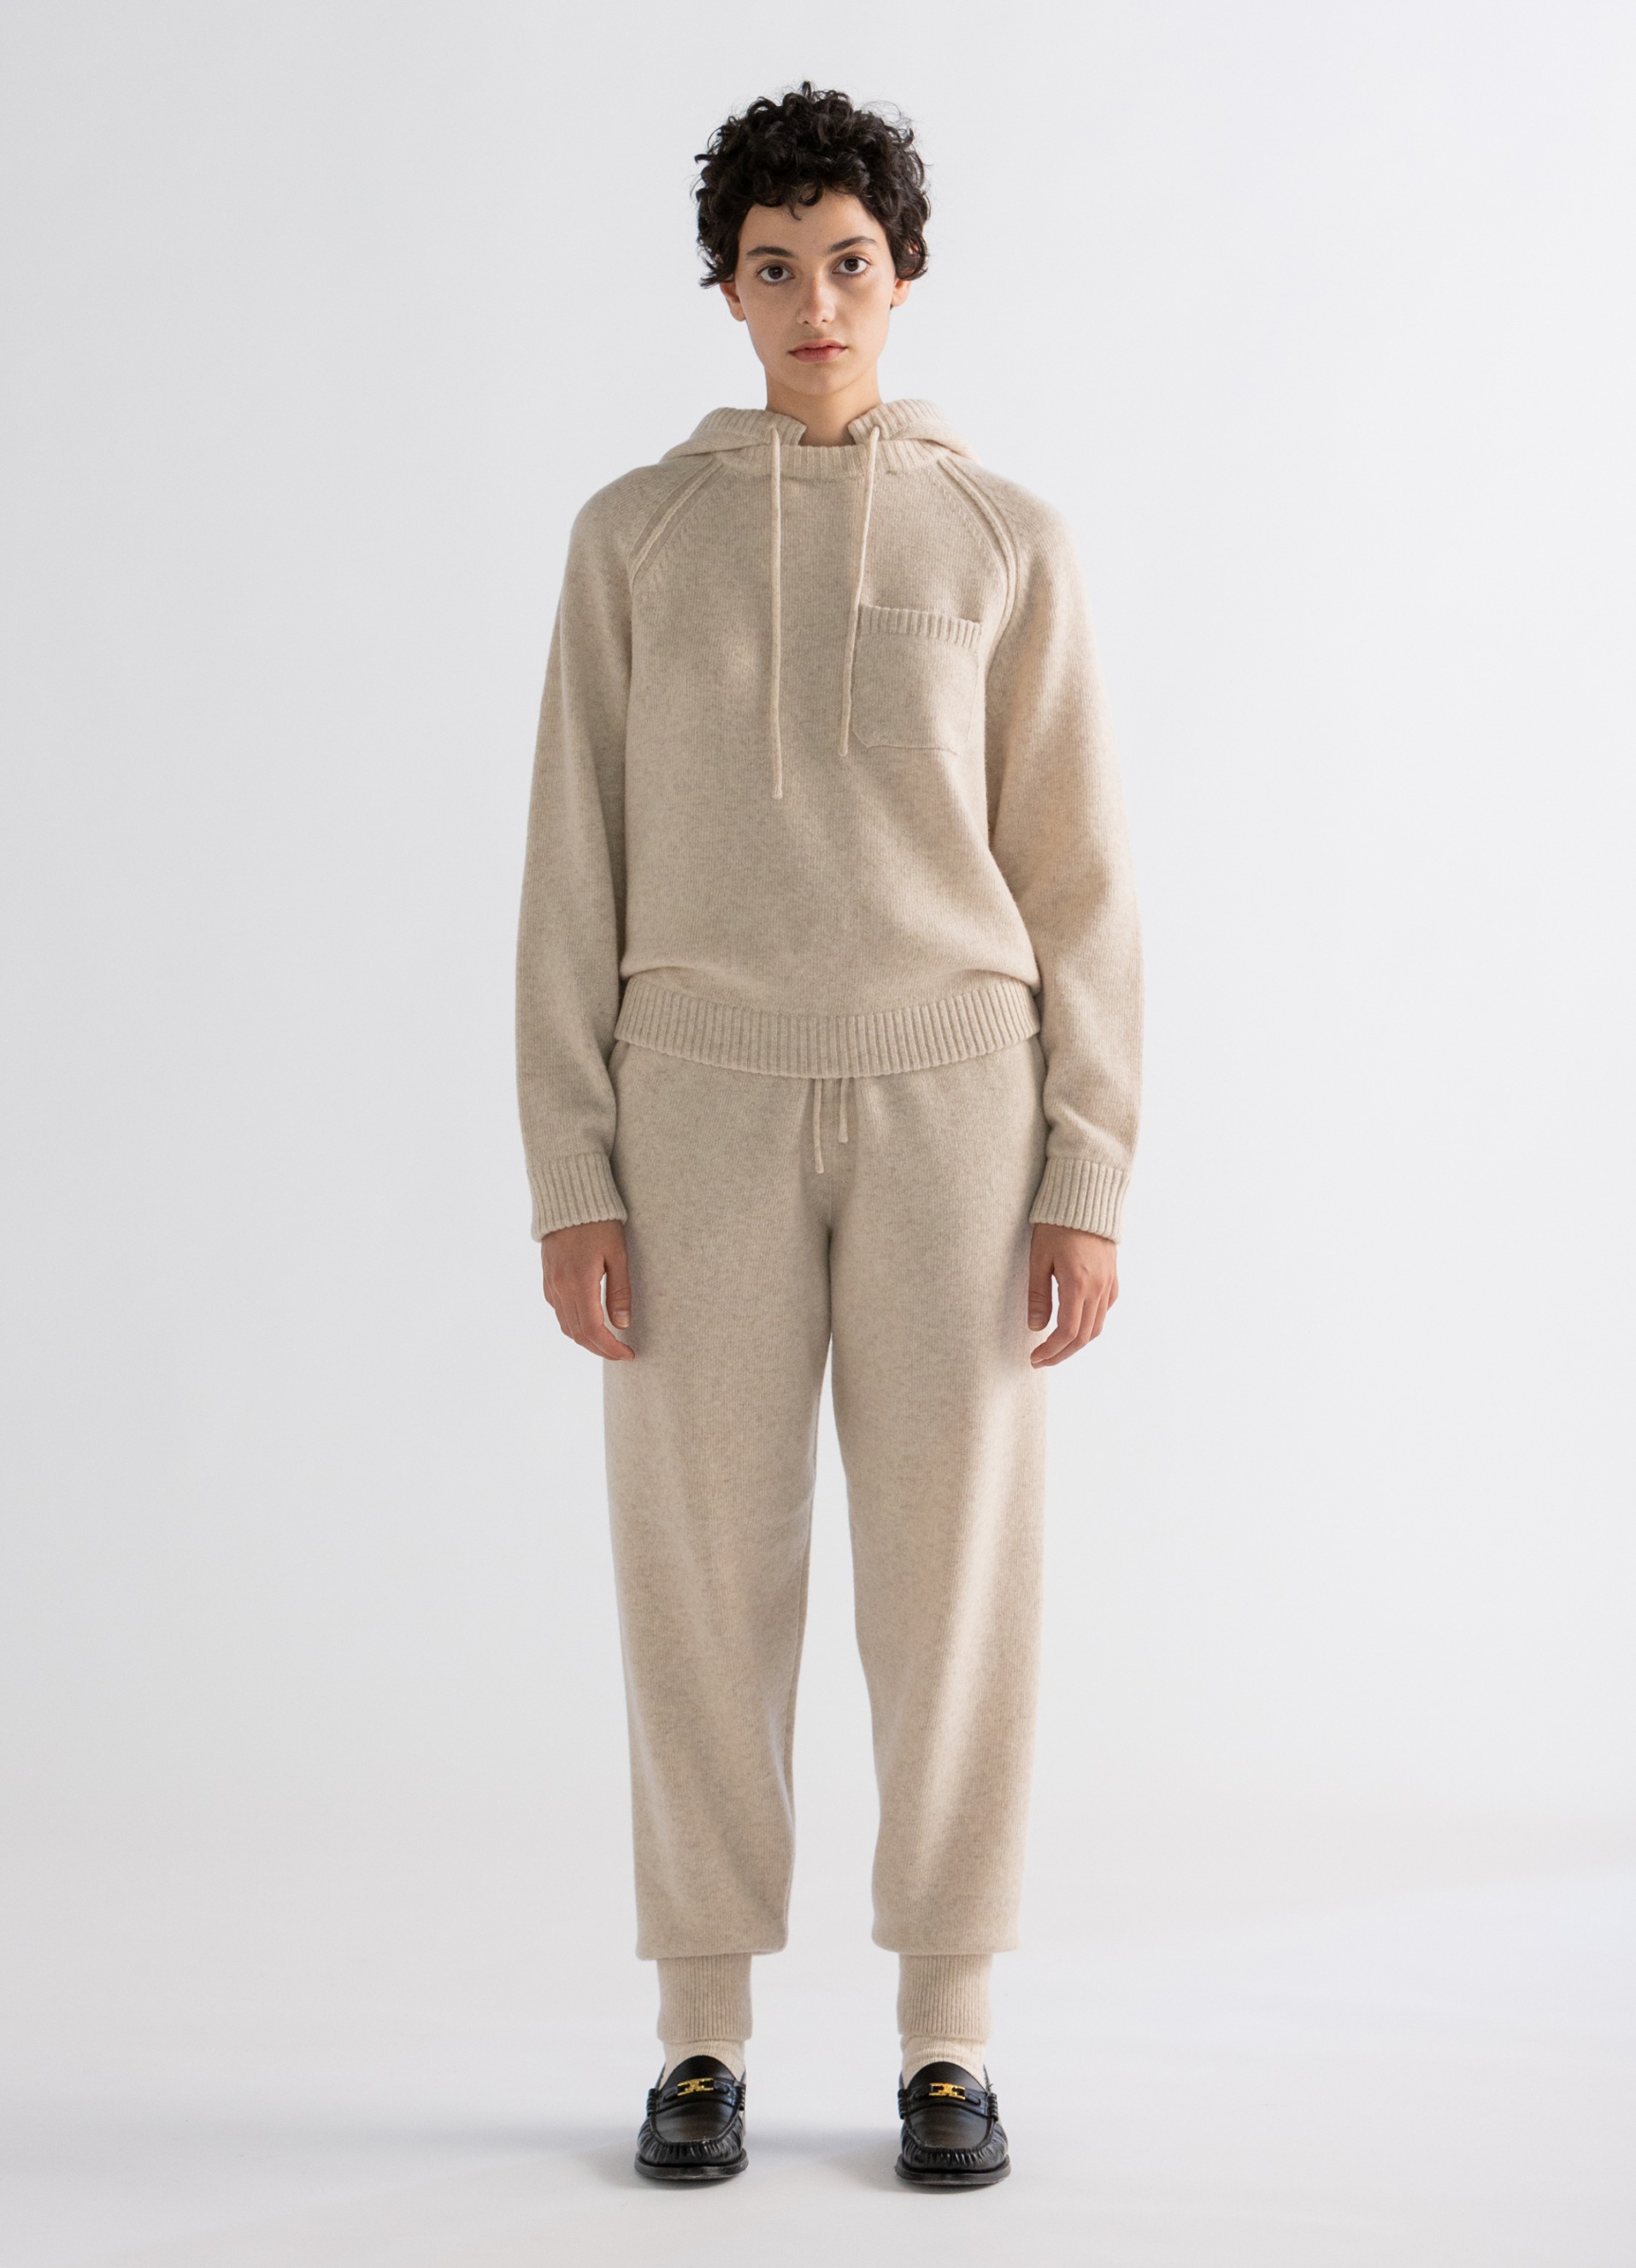 Rubio Knit Pants (Oatmael) Out Of Stock